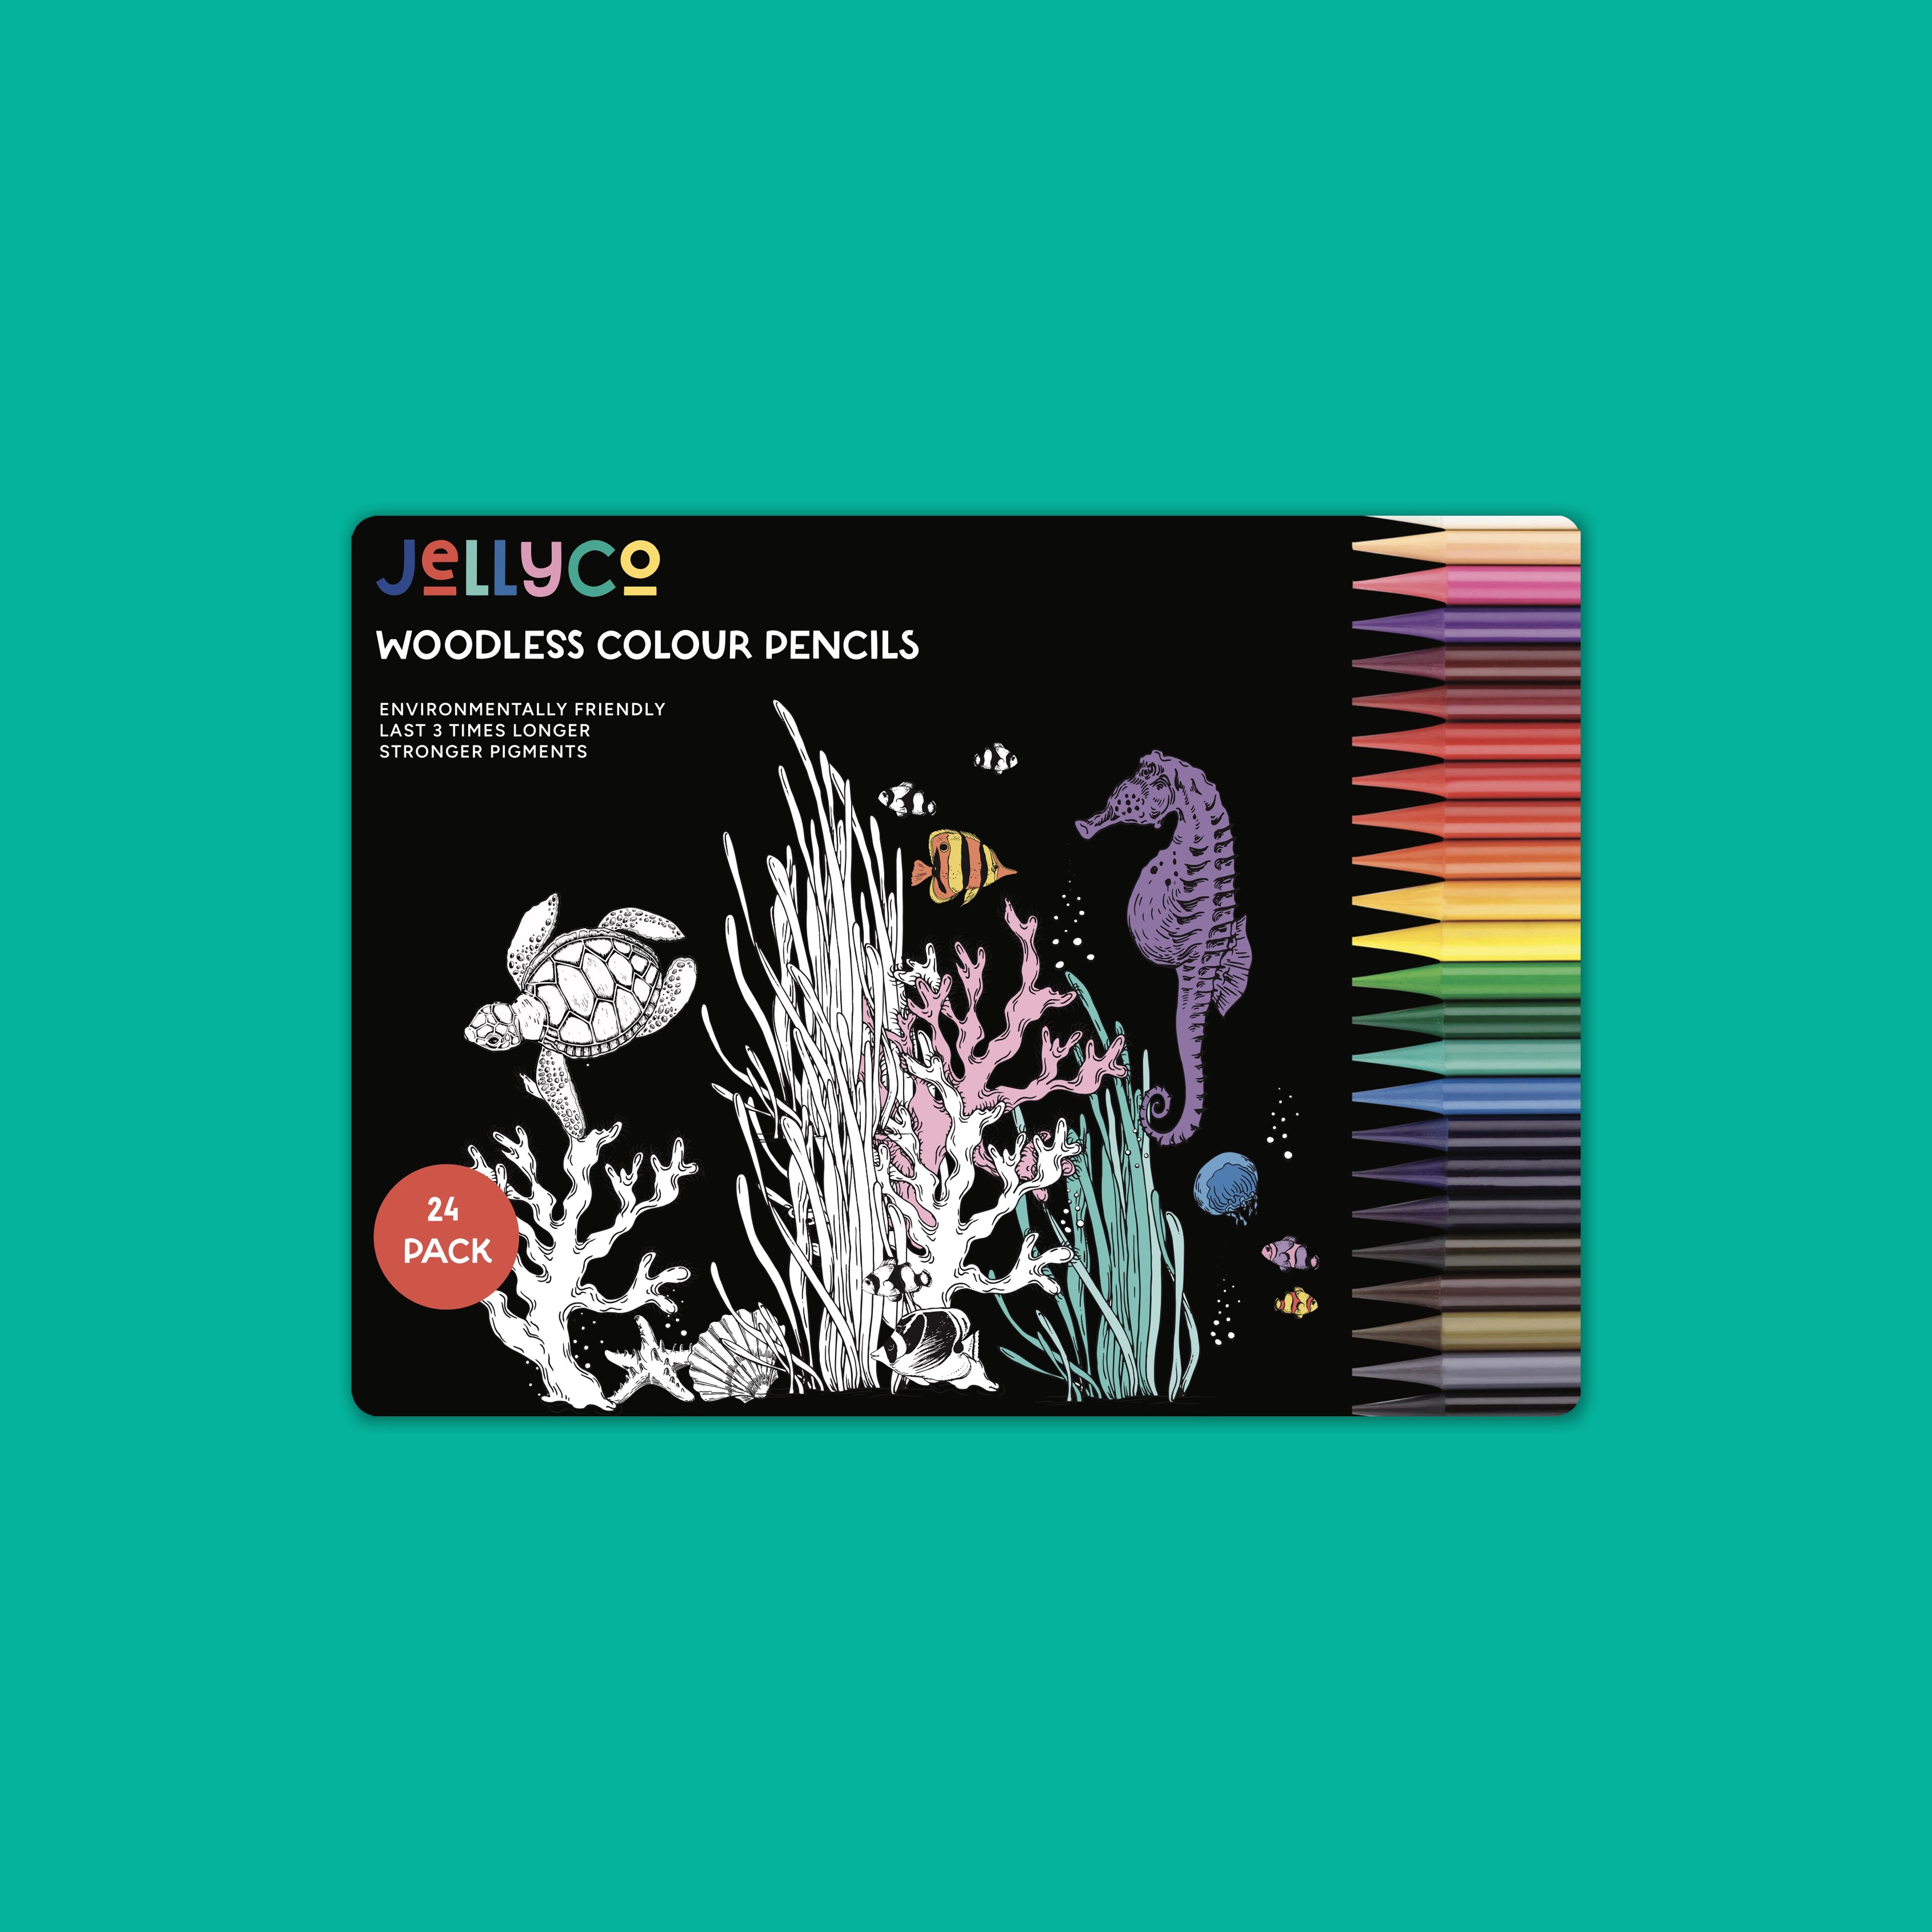 Artist Colored Pencils with Tin, 24-Count